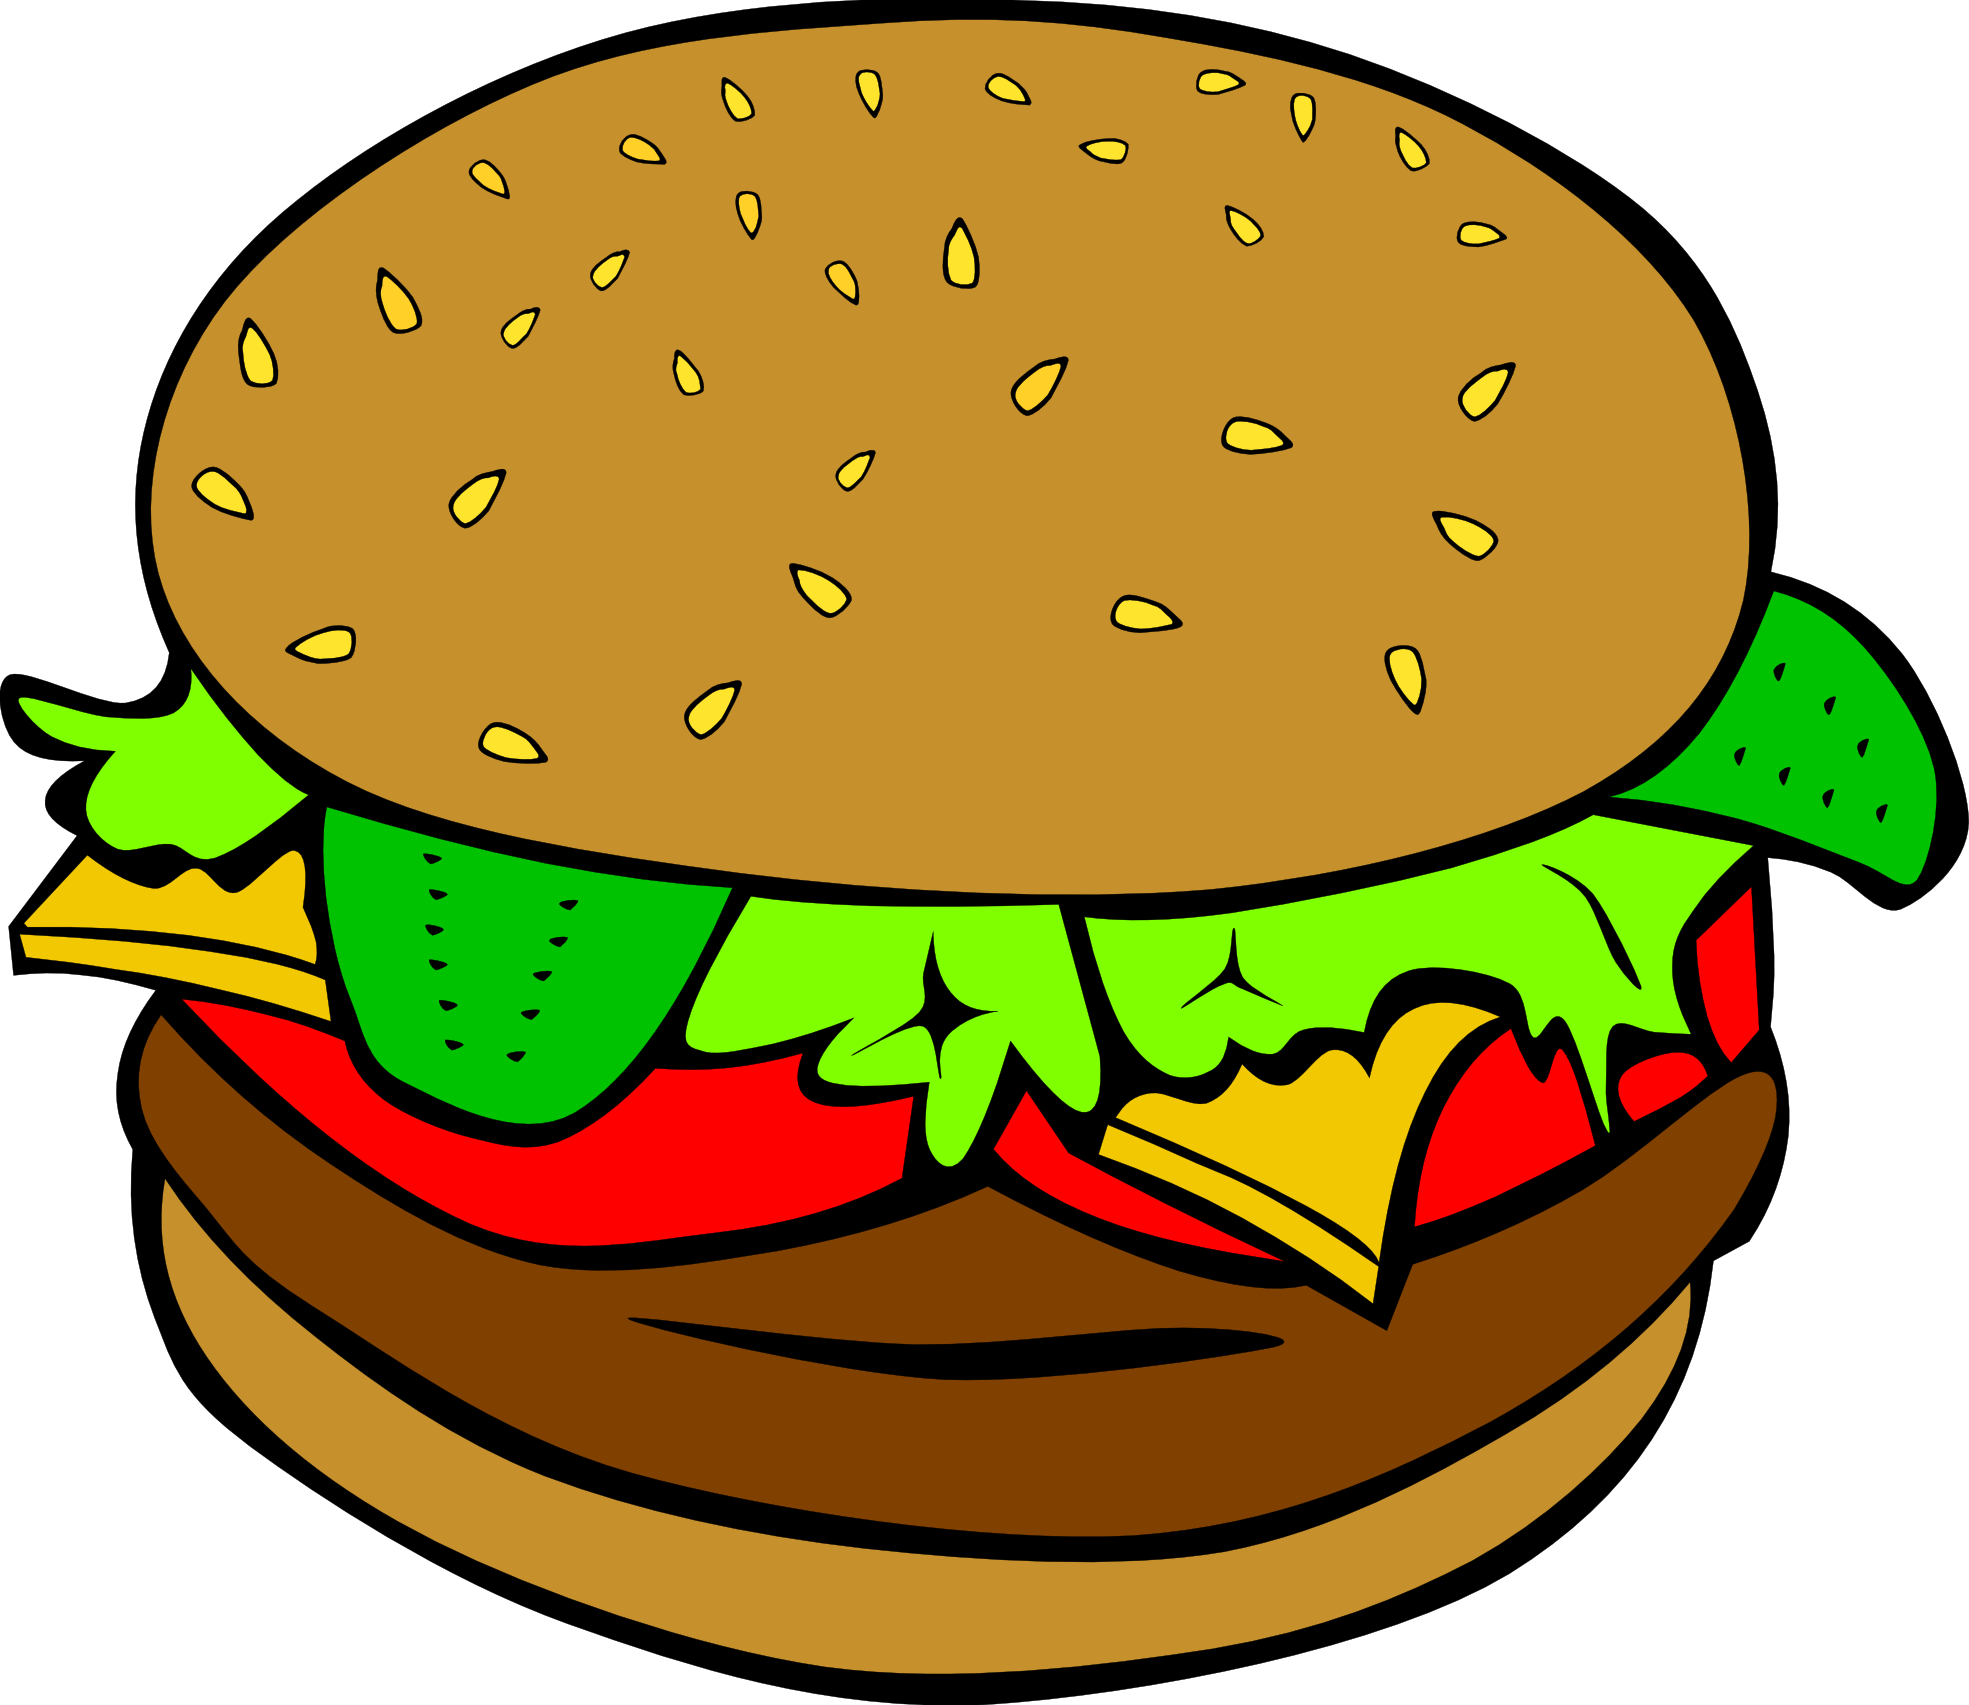 Lunch Hd Image Clipart